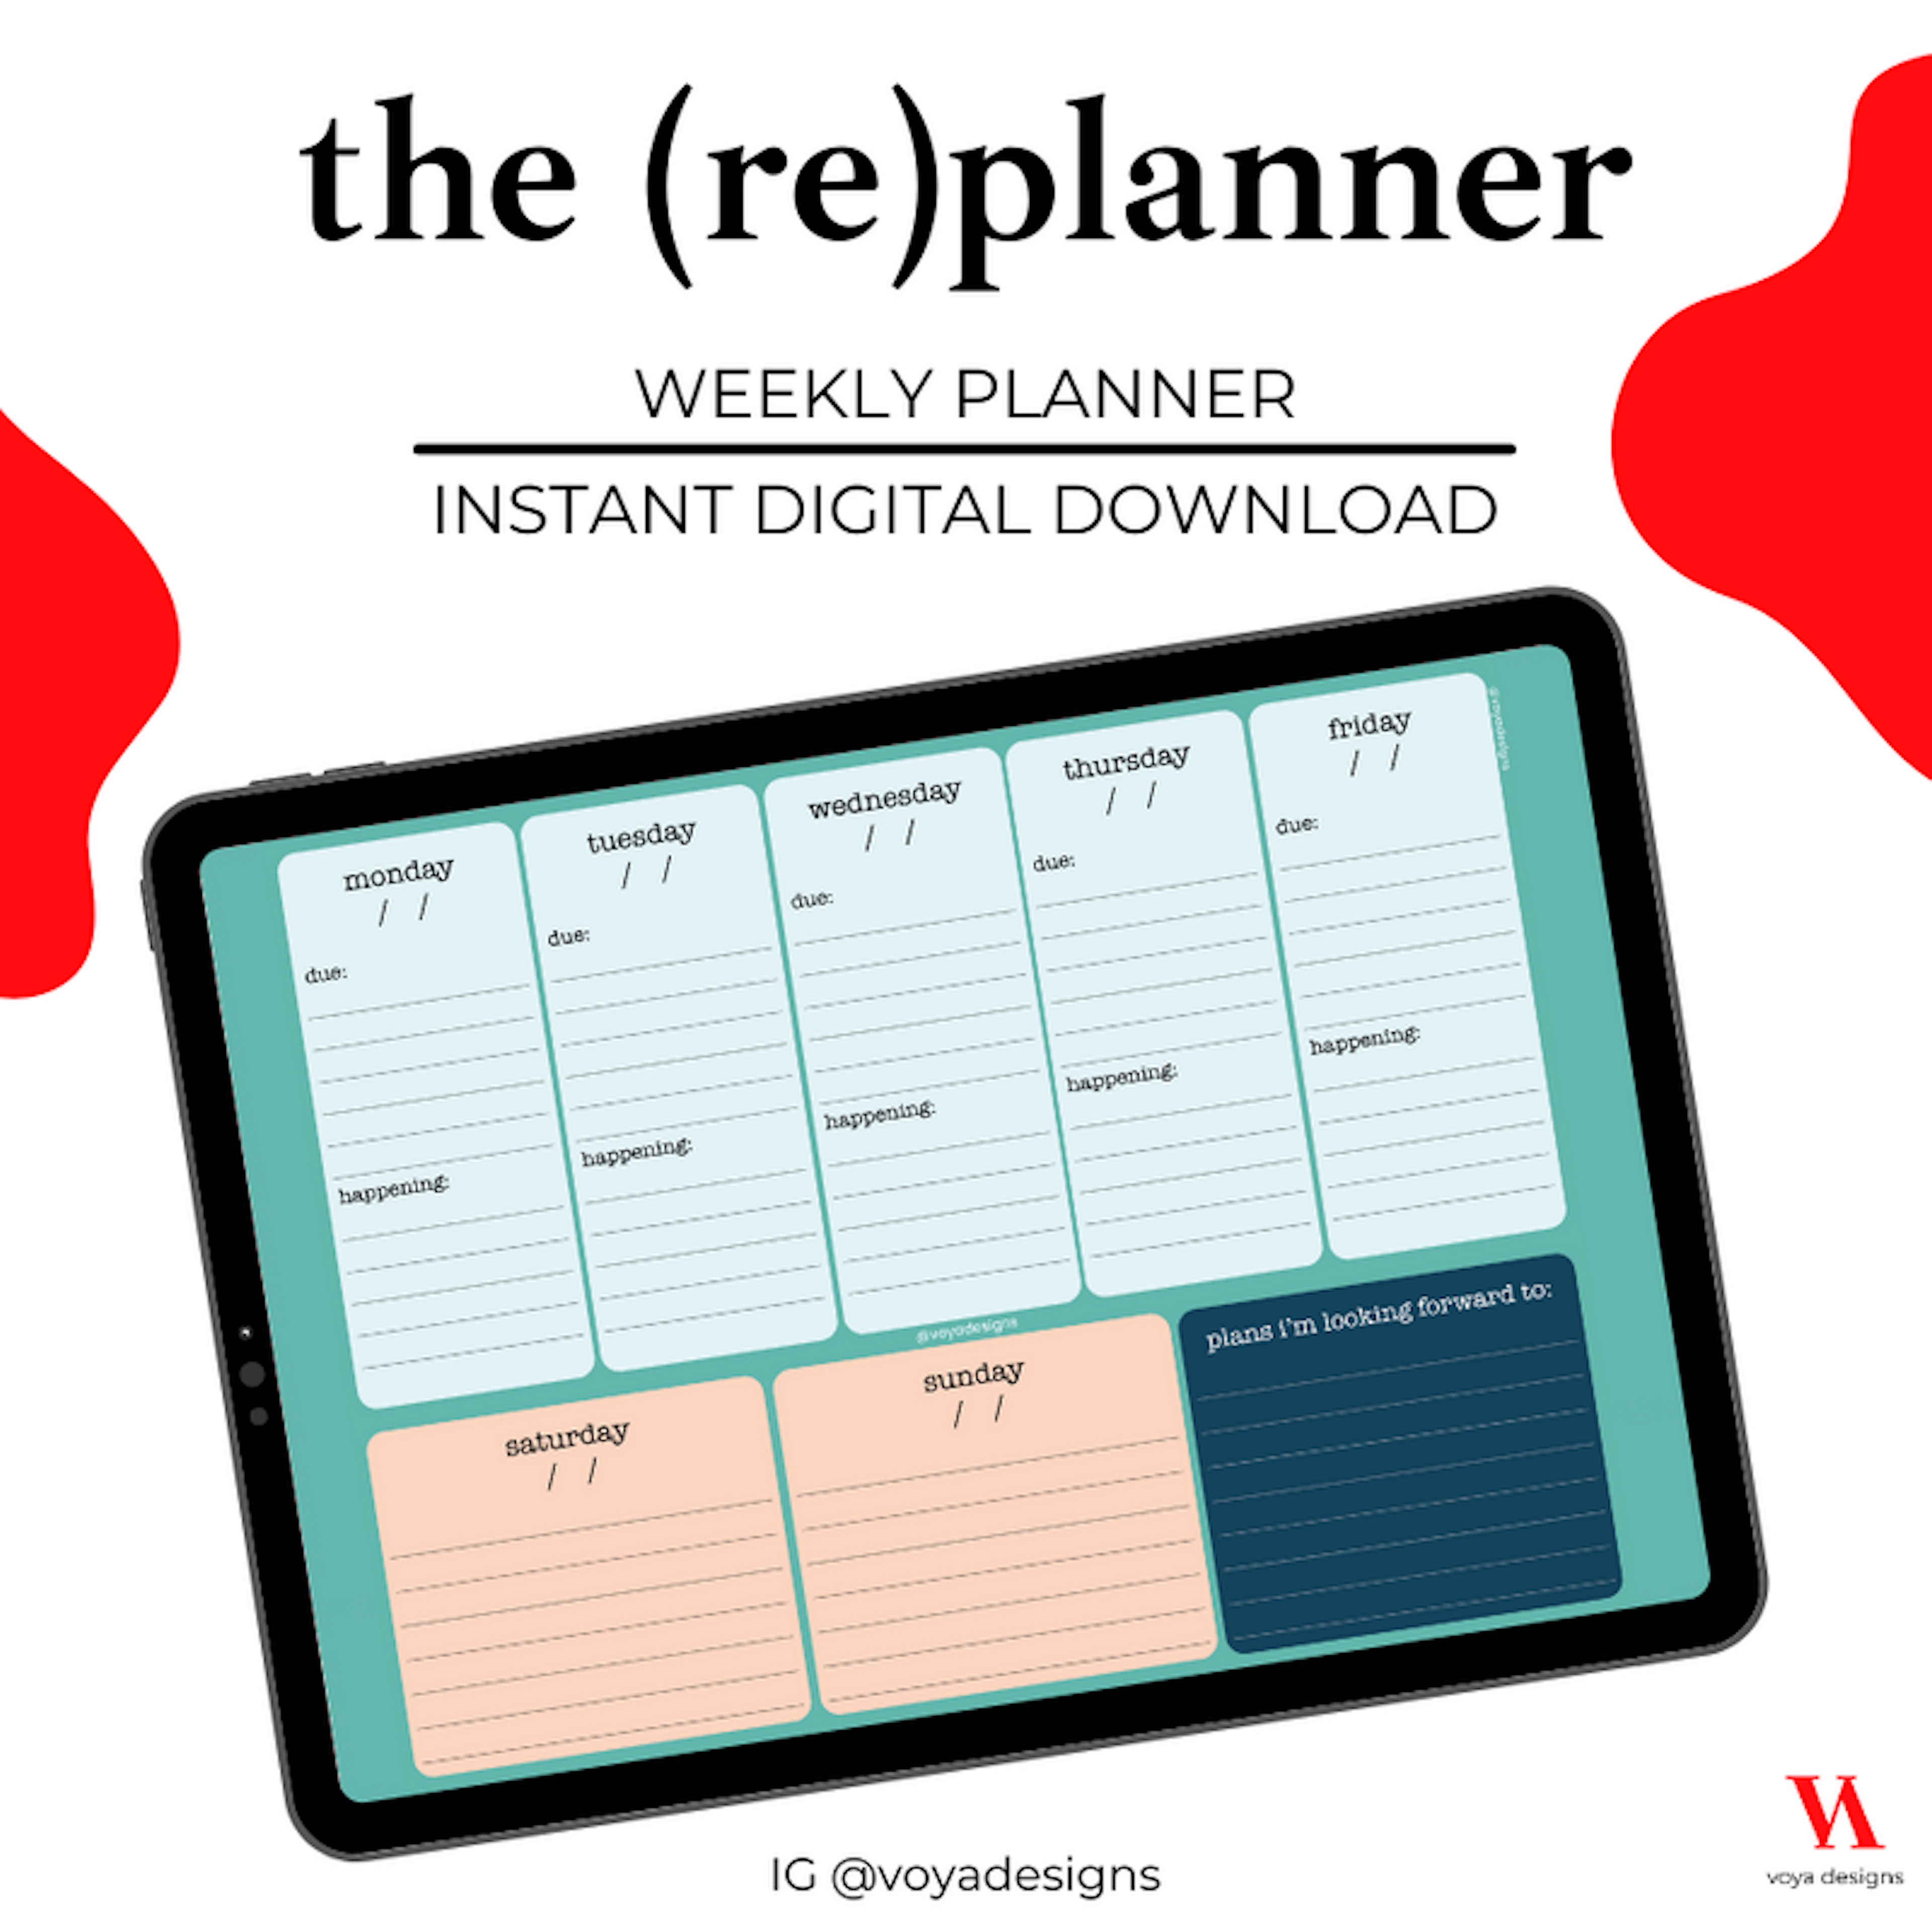 the (re)planner